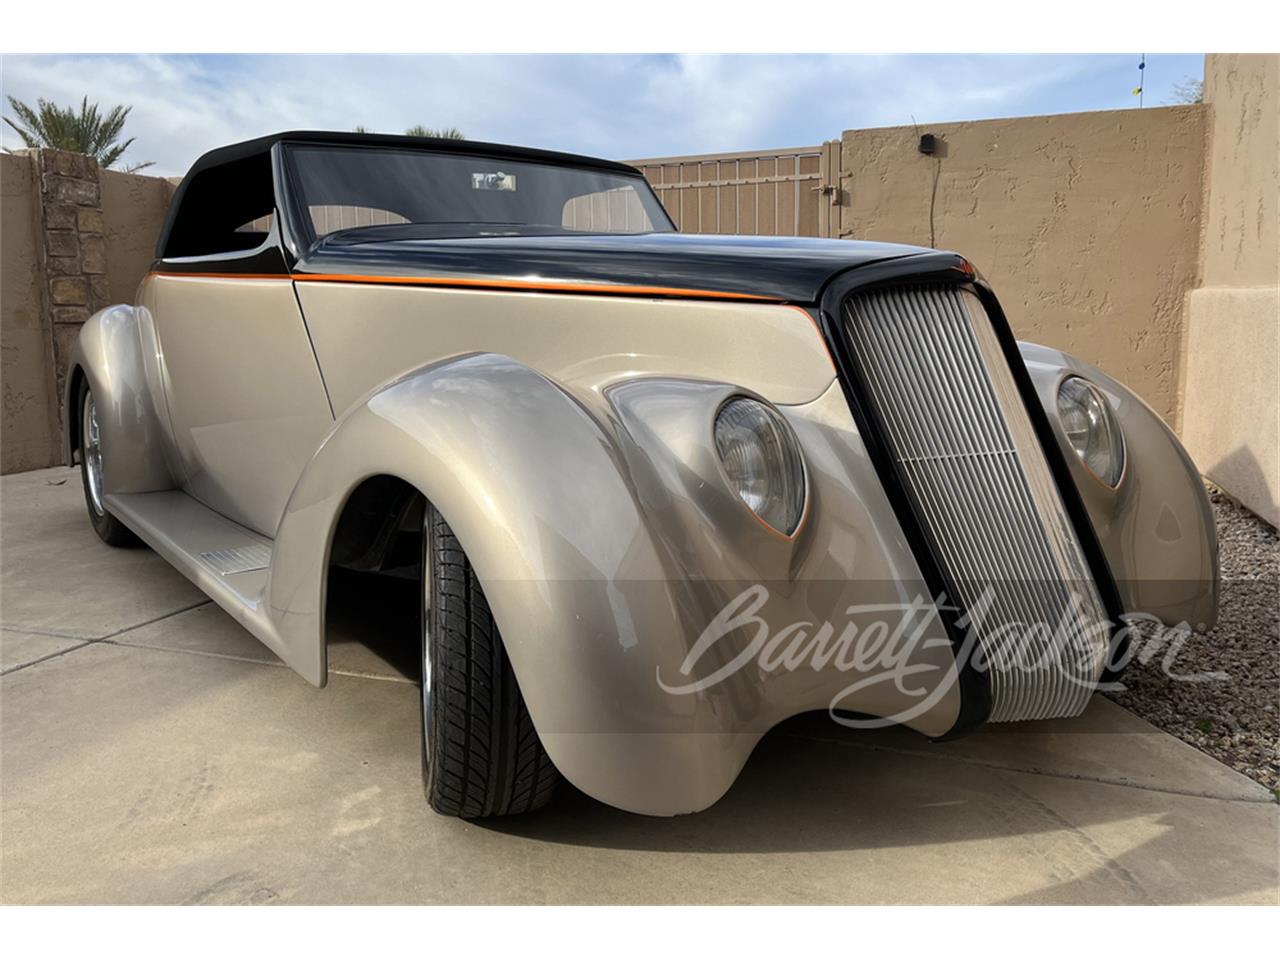 For Sale at Auction: 1935 Ford Custom in Scottsdale, Arizona for sale in Scottsdale, AZ